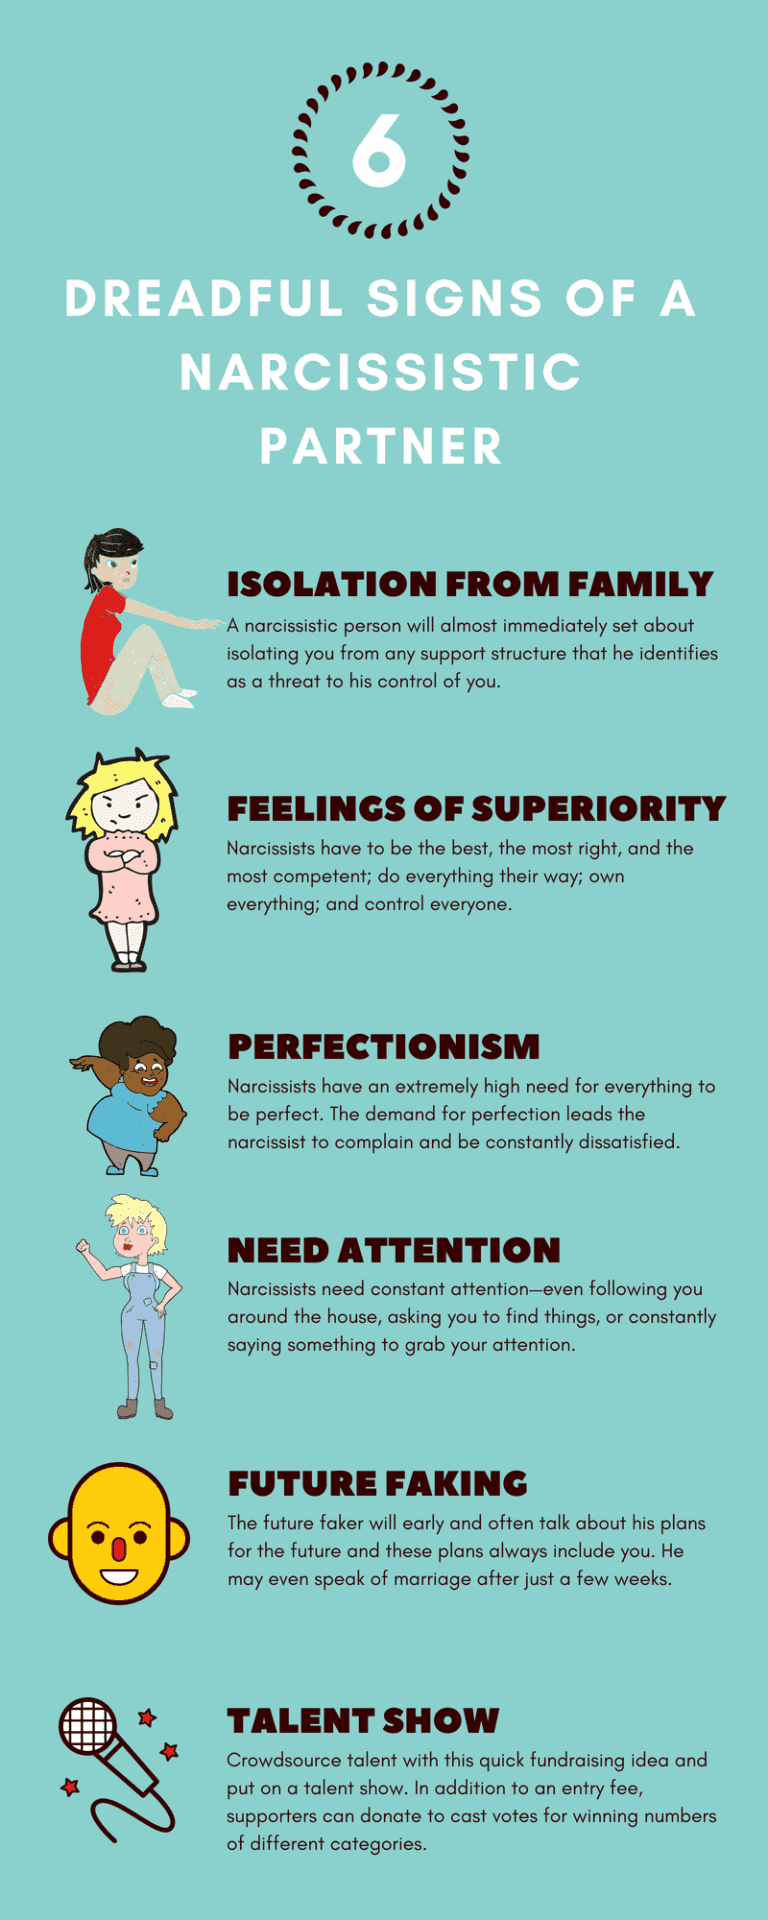 what are the symptoms of a narcissistic person